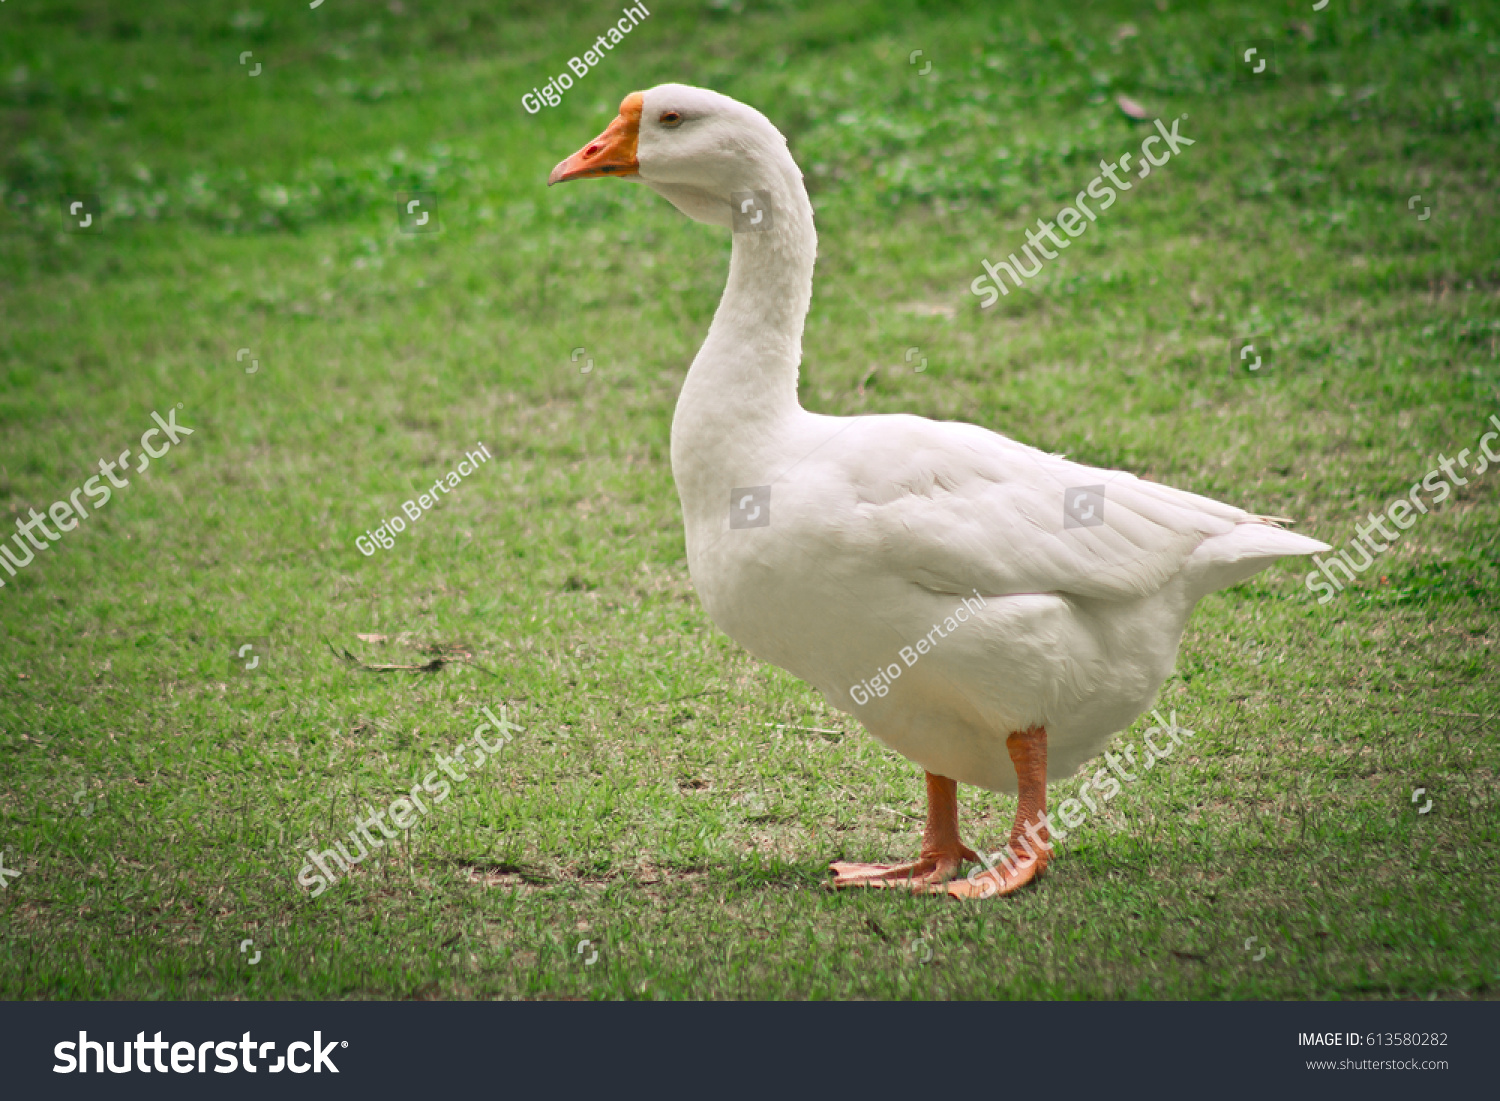 side view of white goose standing on green grass #613580282